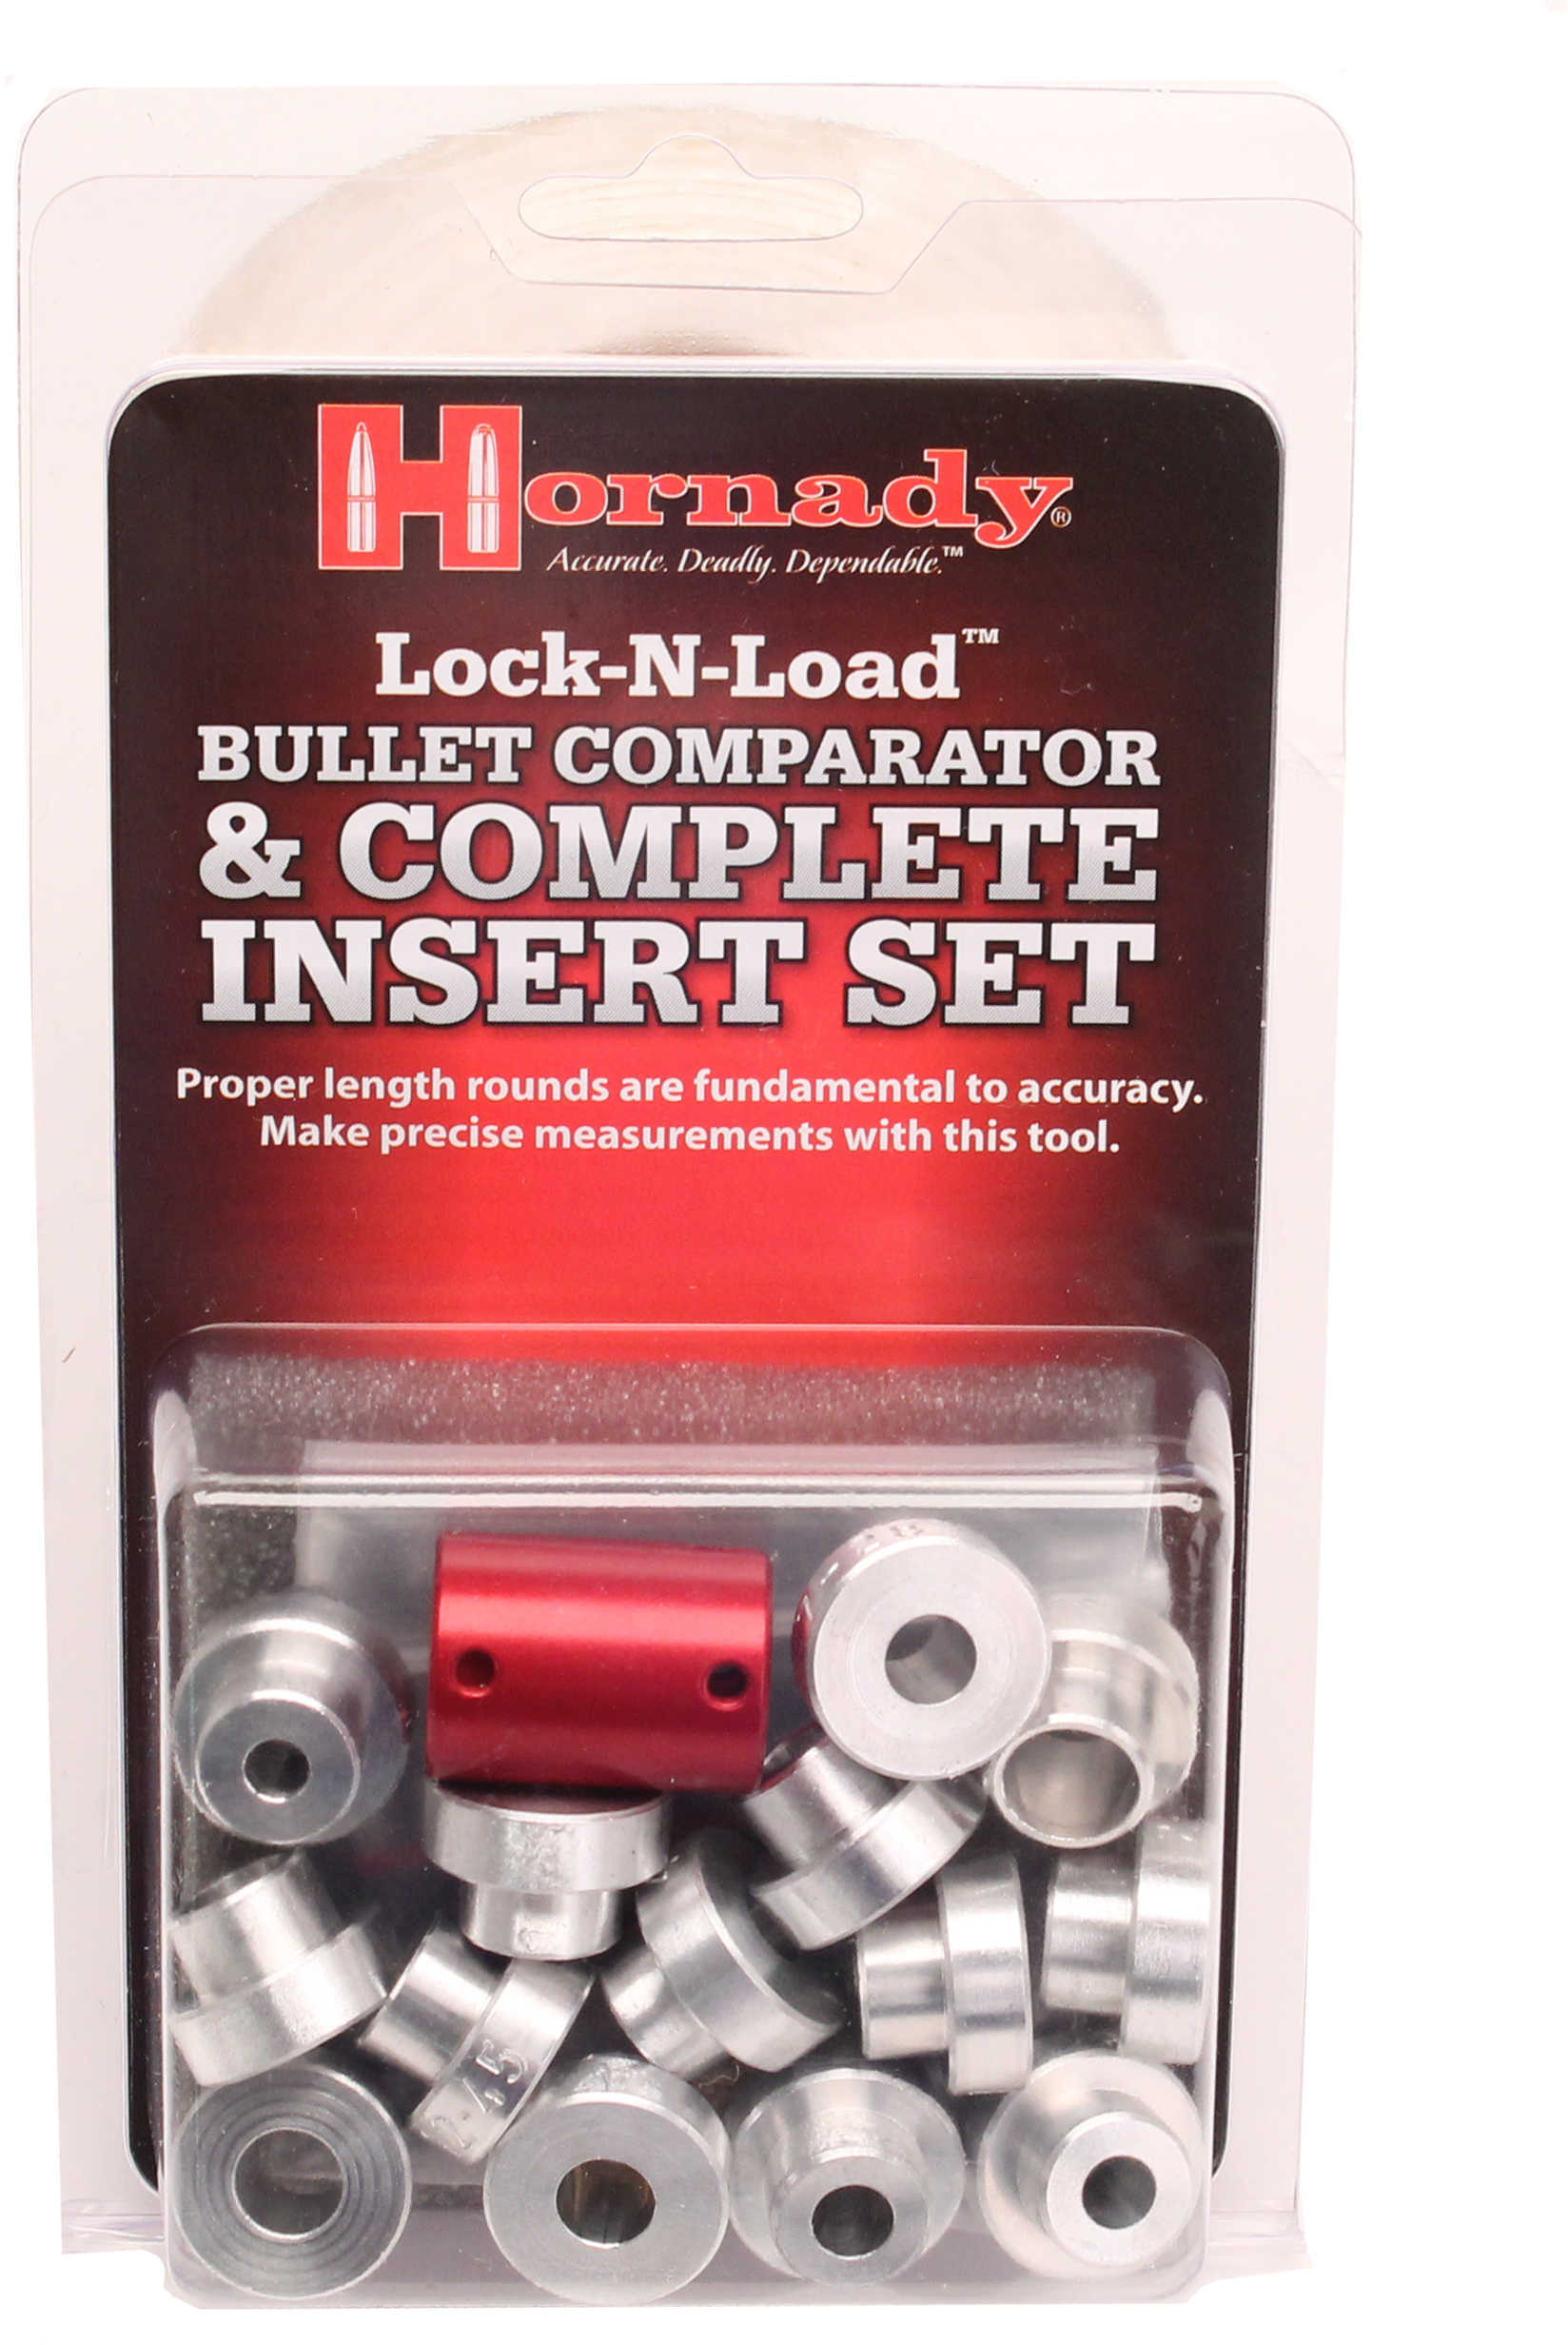 Hornady Lock-N-Load Bullet Comparator - Complete Set With 14 Inserts